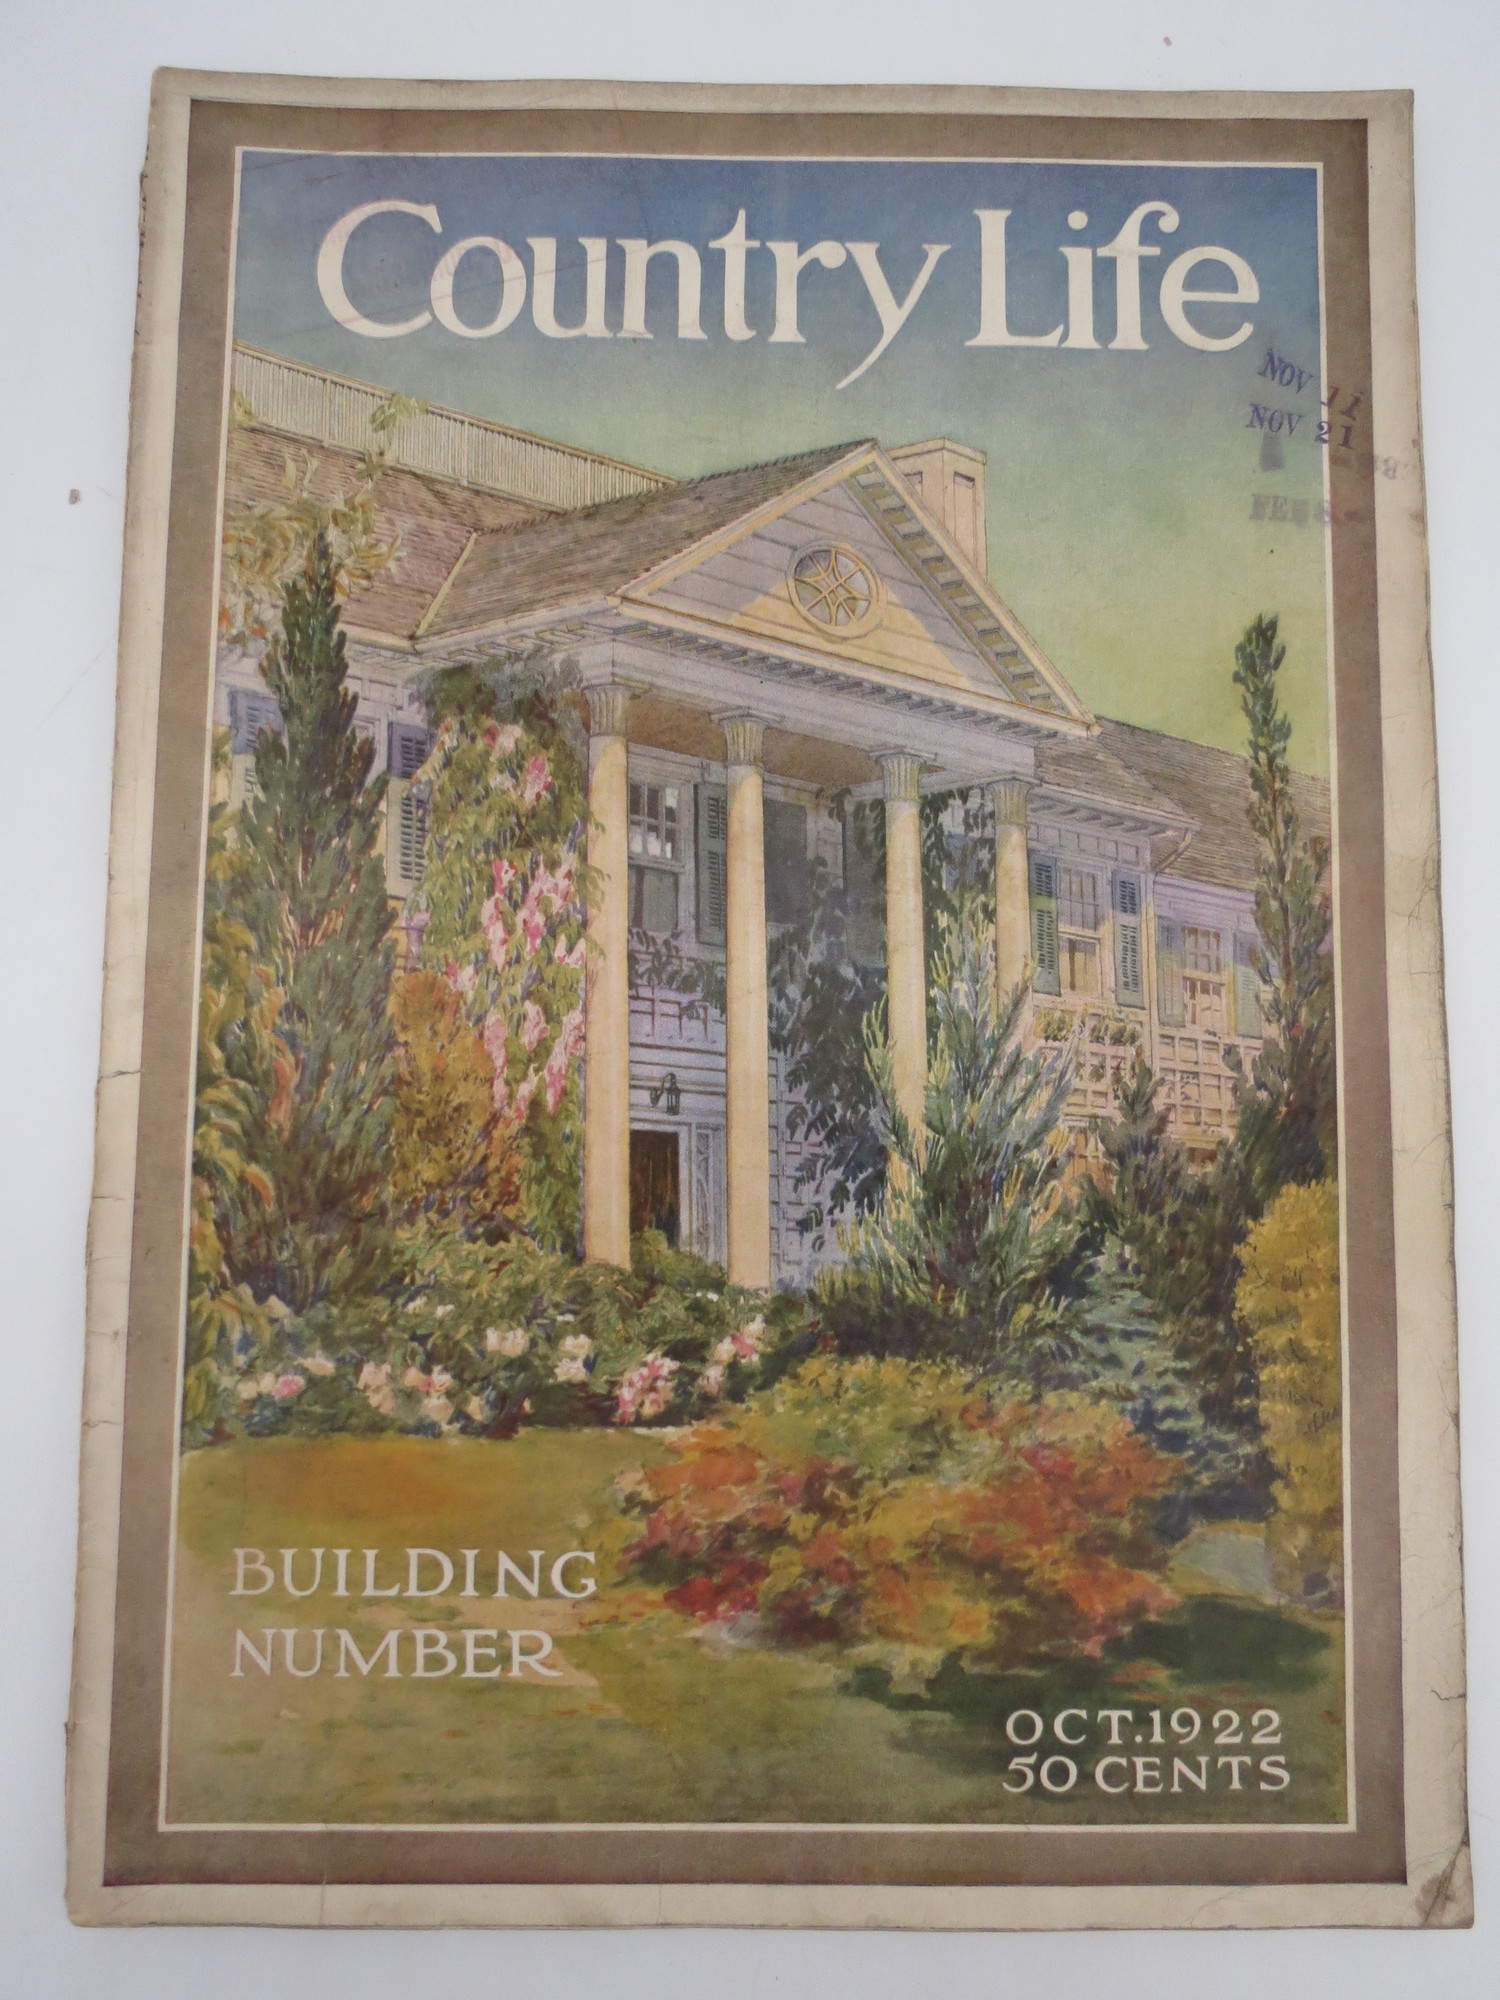 COUNTRY LIFE MAGAZINE, OCTOBER 1922 (BUILDING NUMBER)